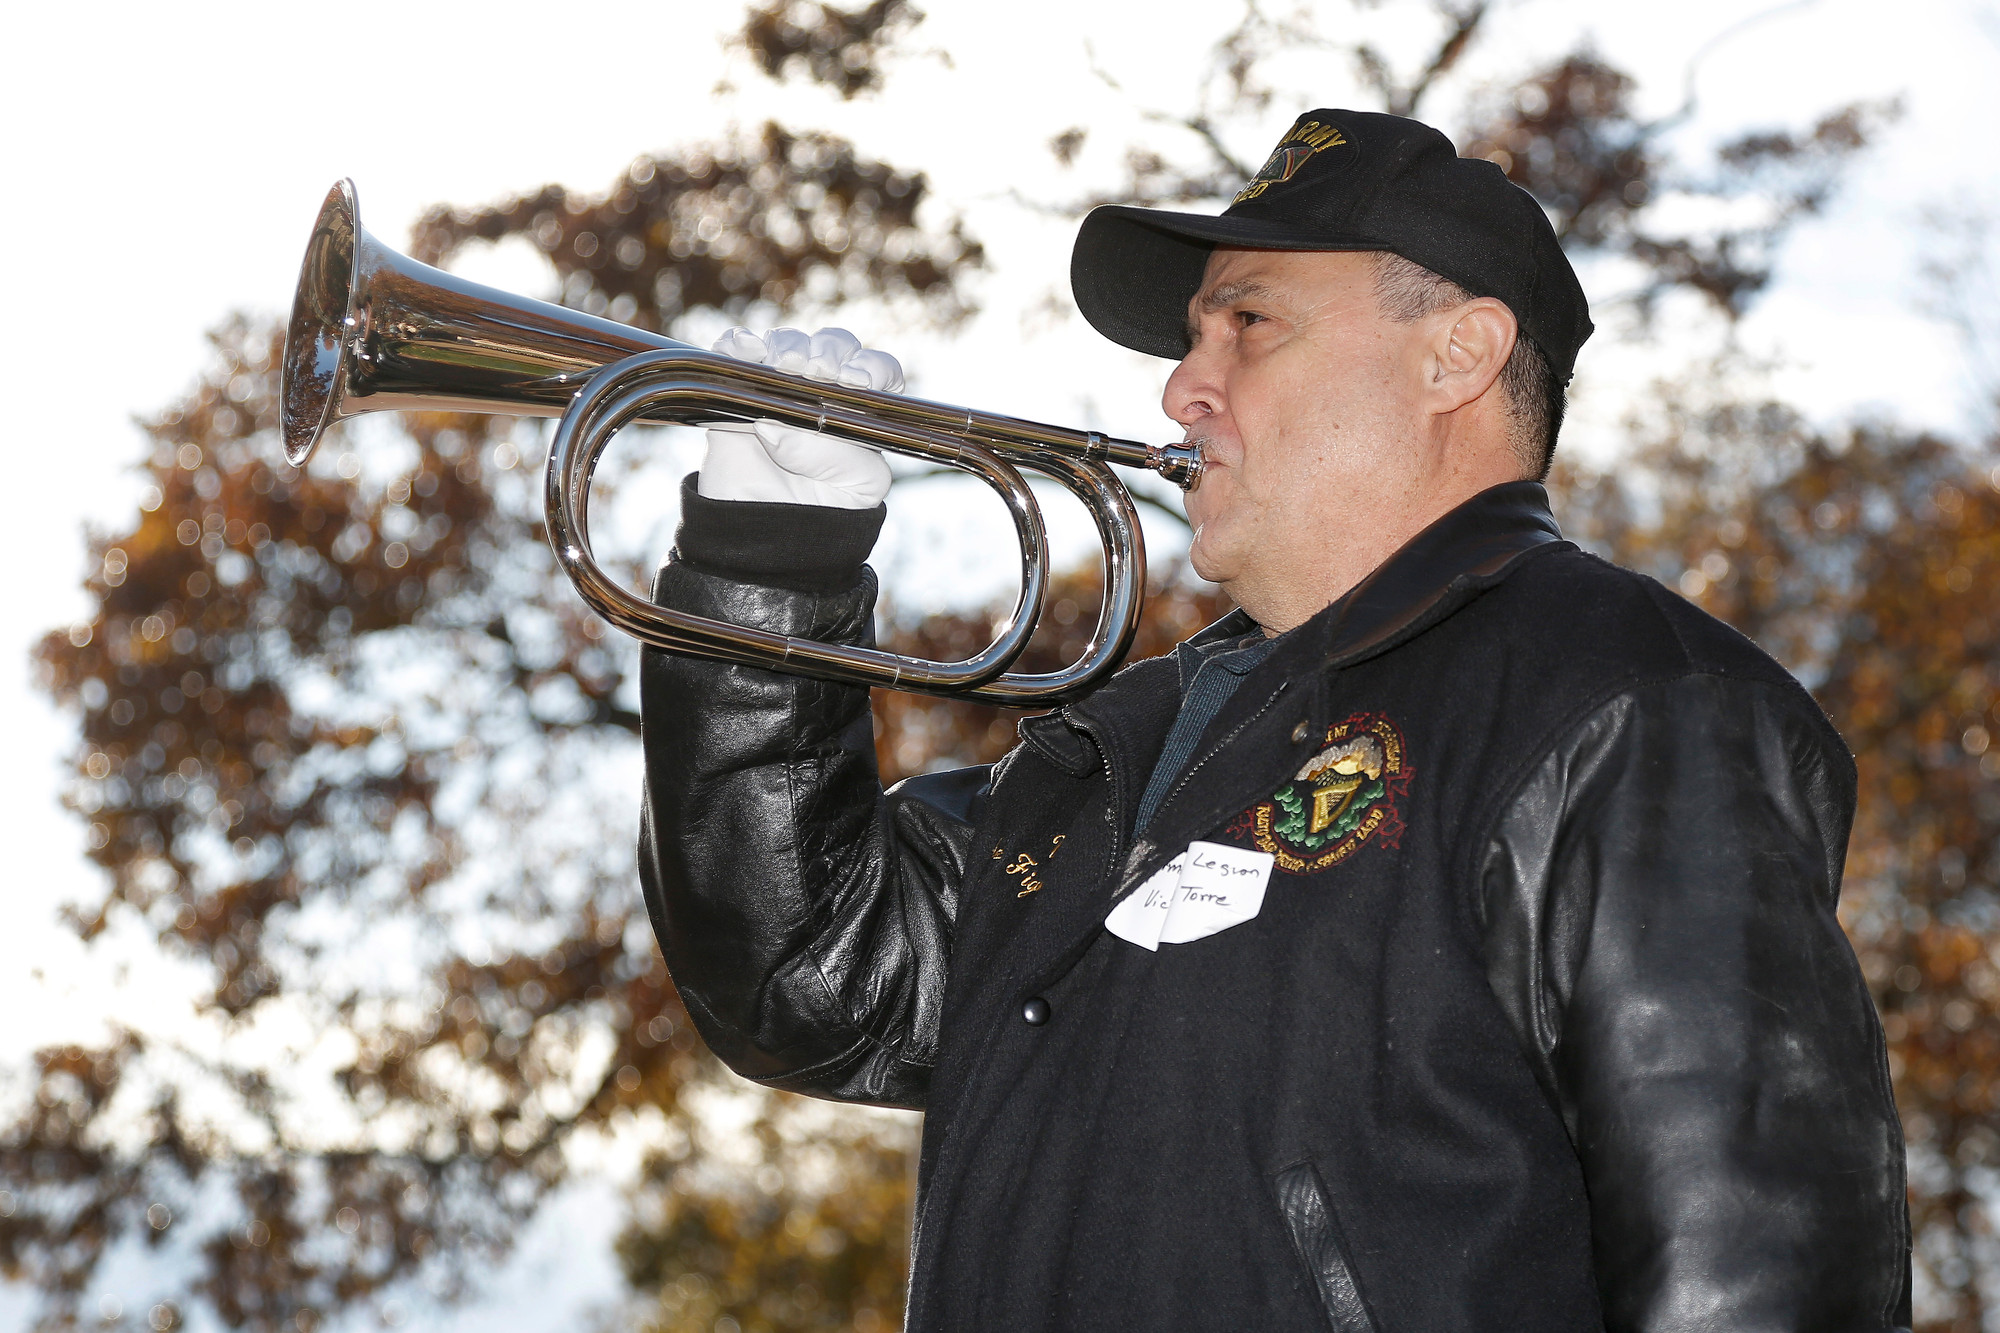 Victor LaTorre, a U.S. Army veteran, played taps at the conclusion of the service.